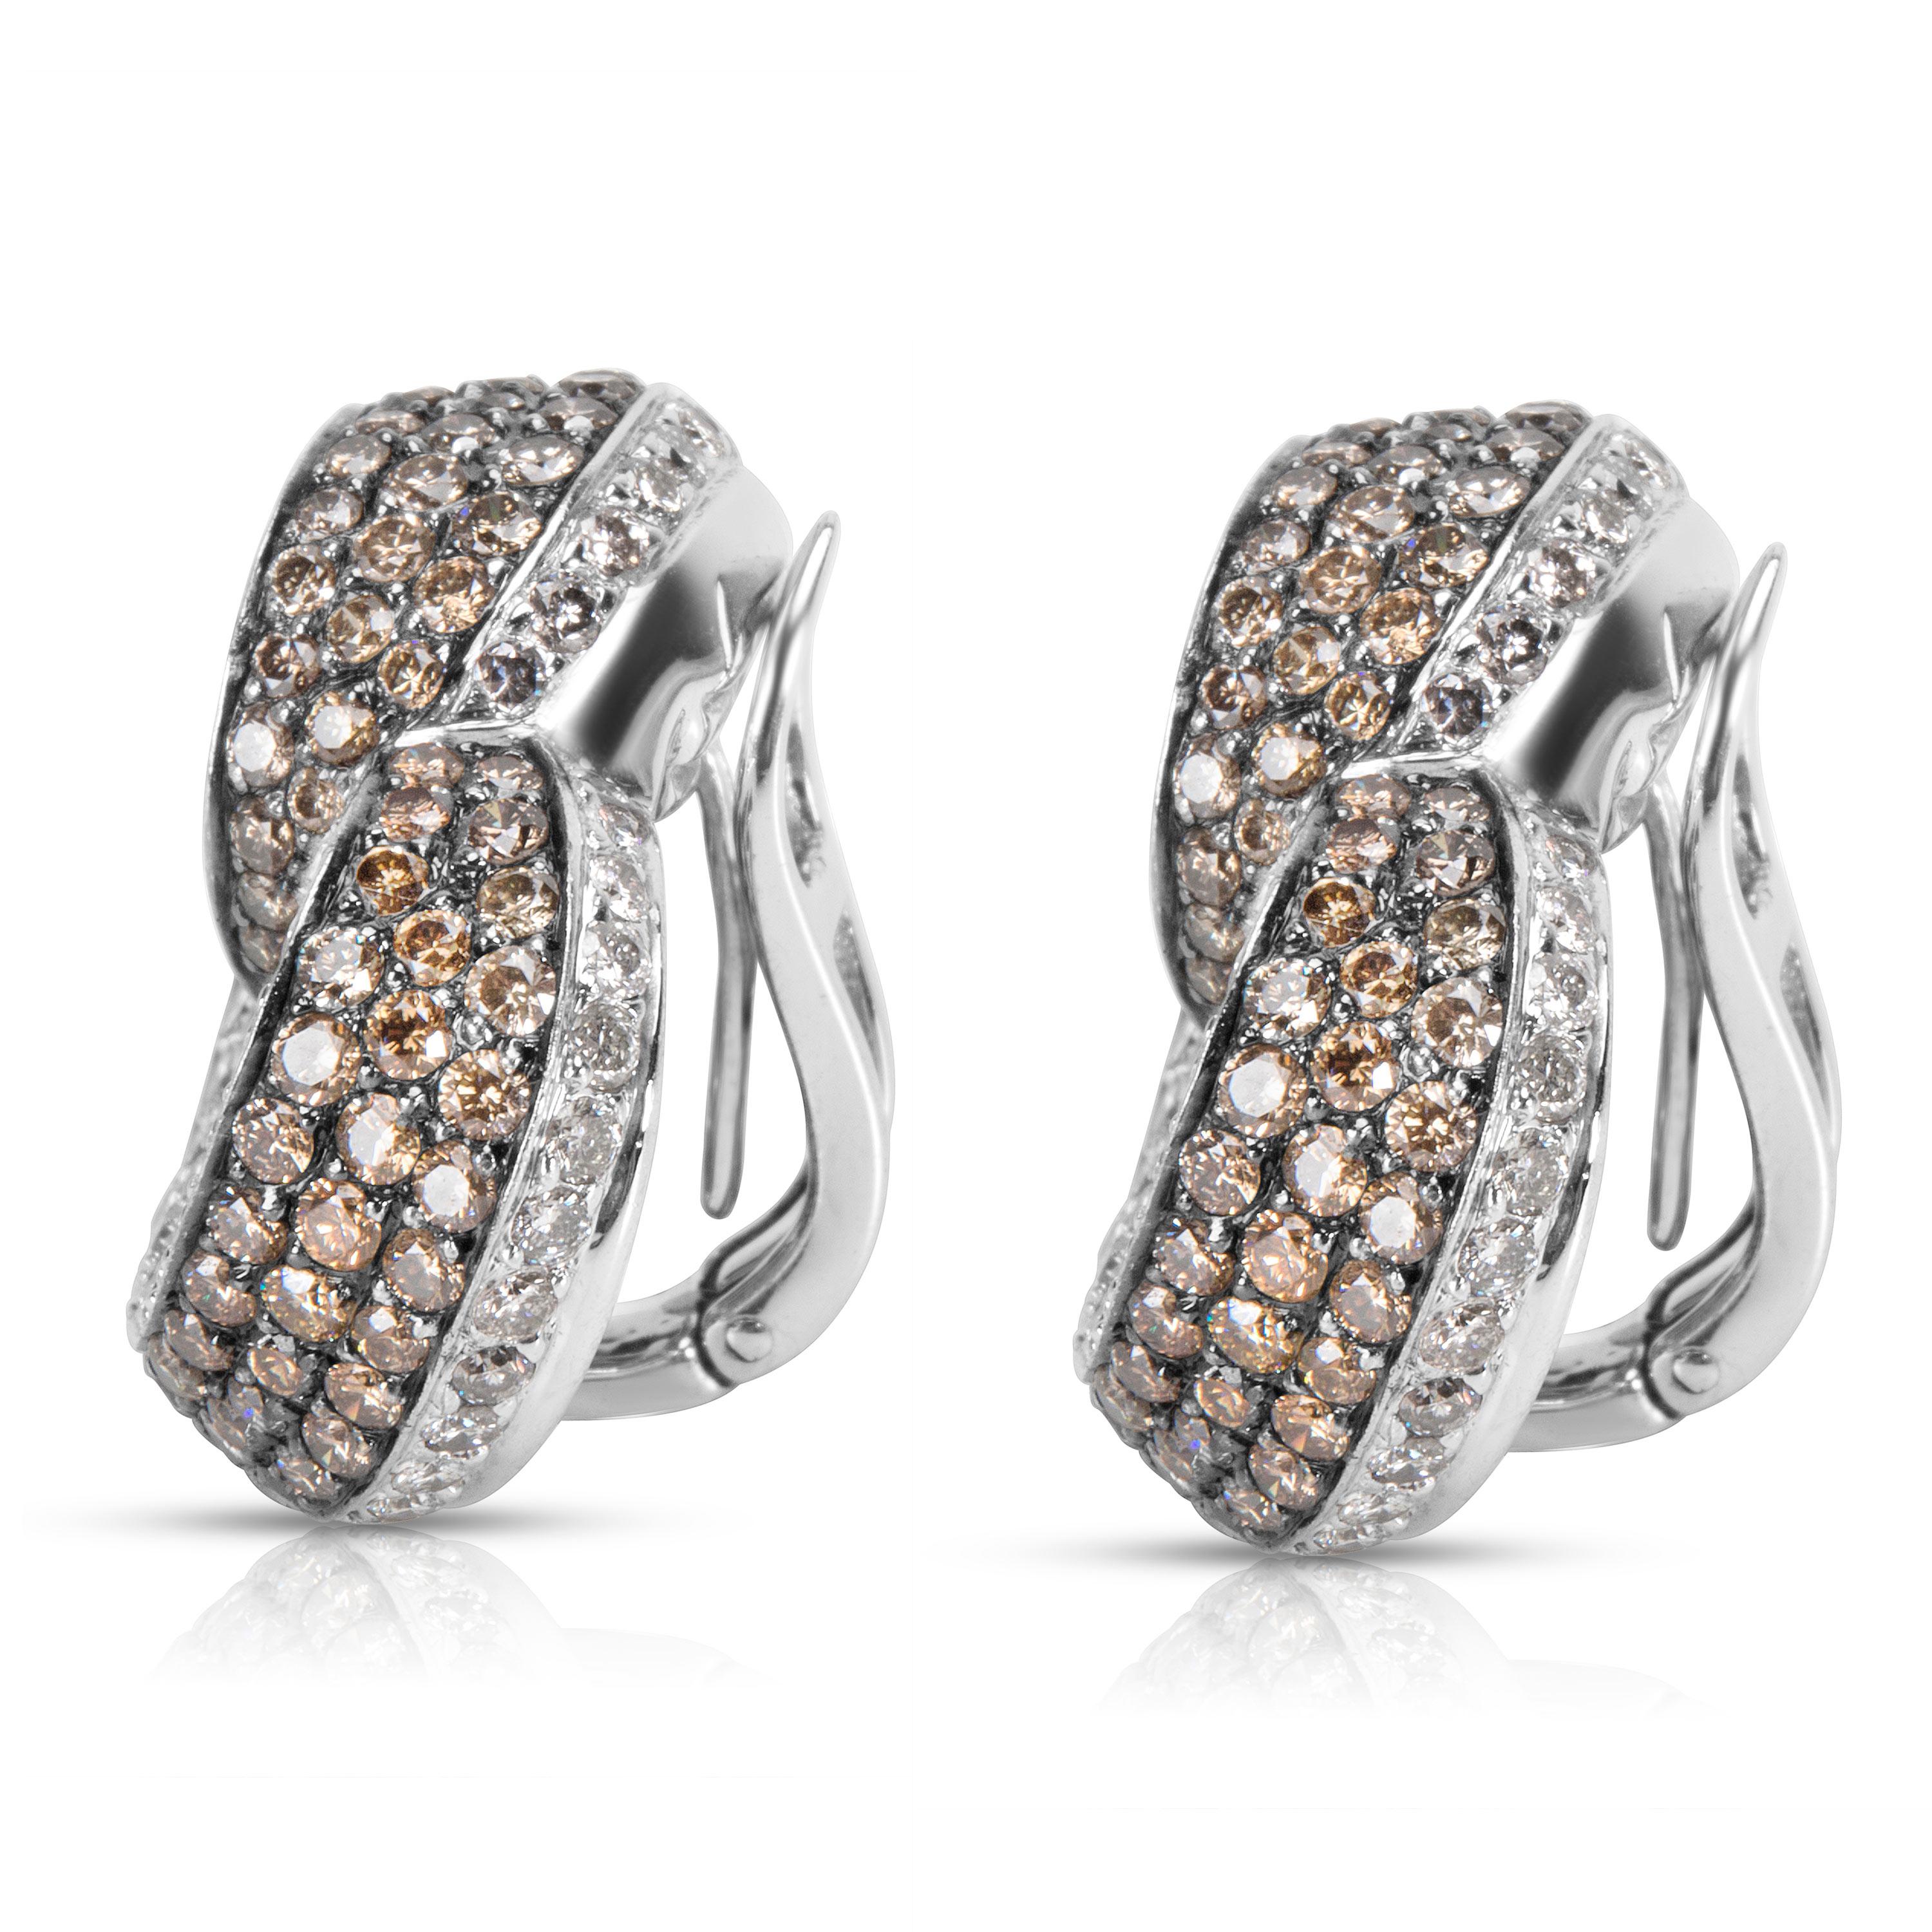 Round Cut Brown and White Diamond Heart Earrings in 18 Karat White Gold 7.00 Carat